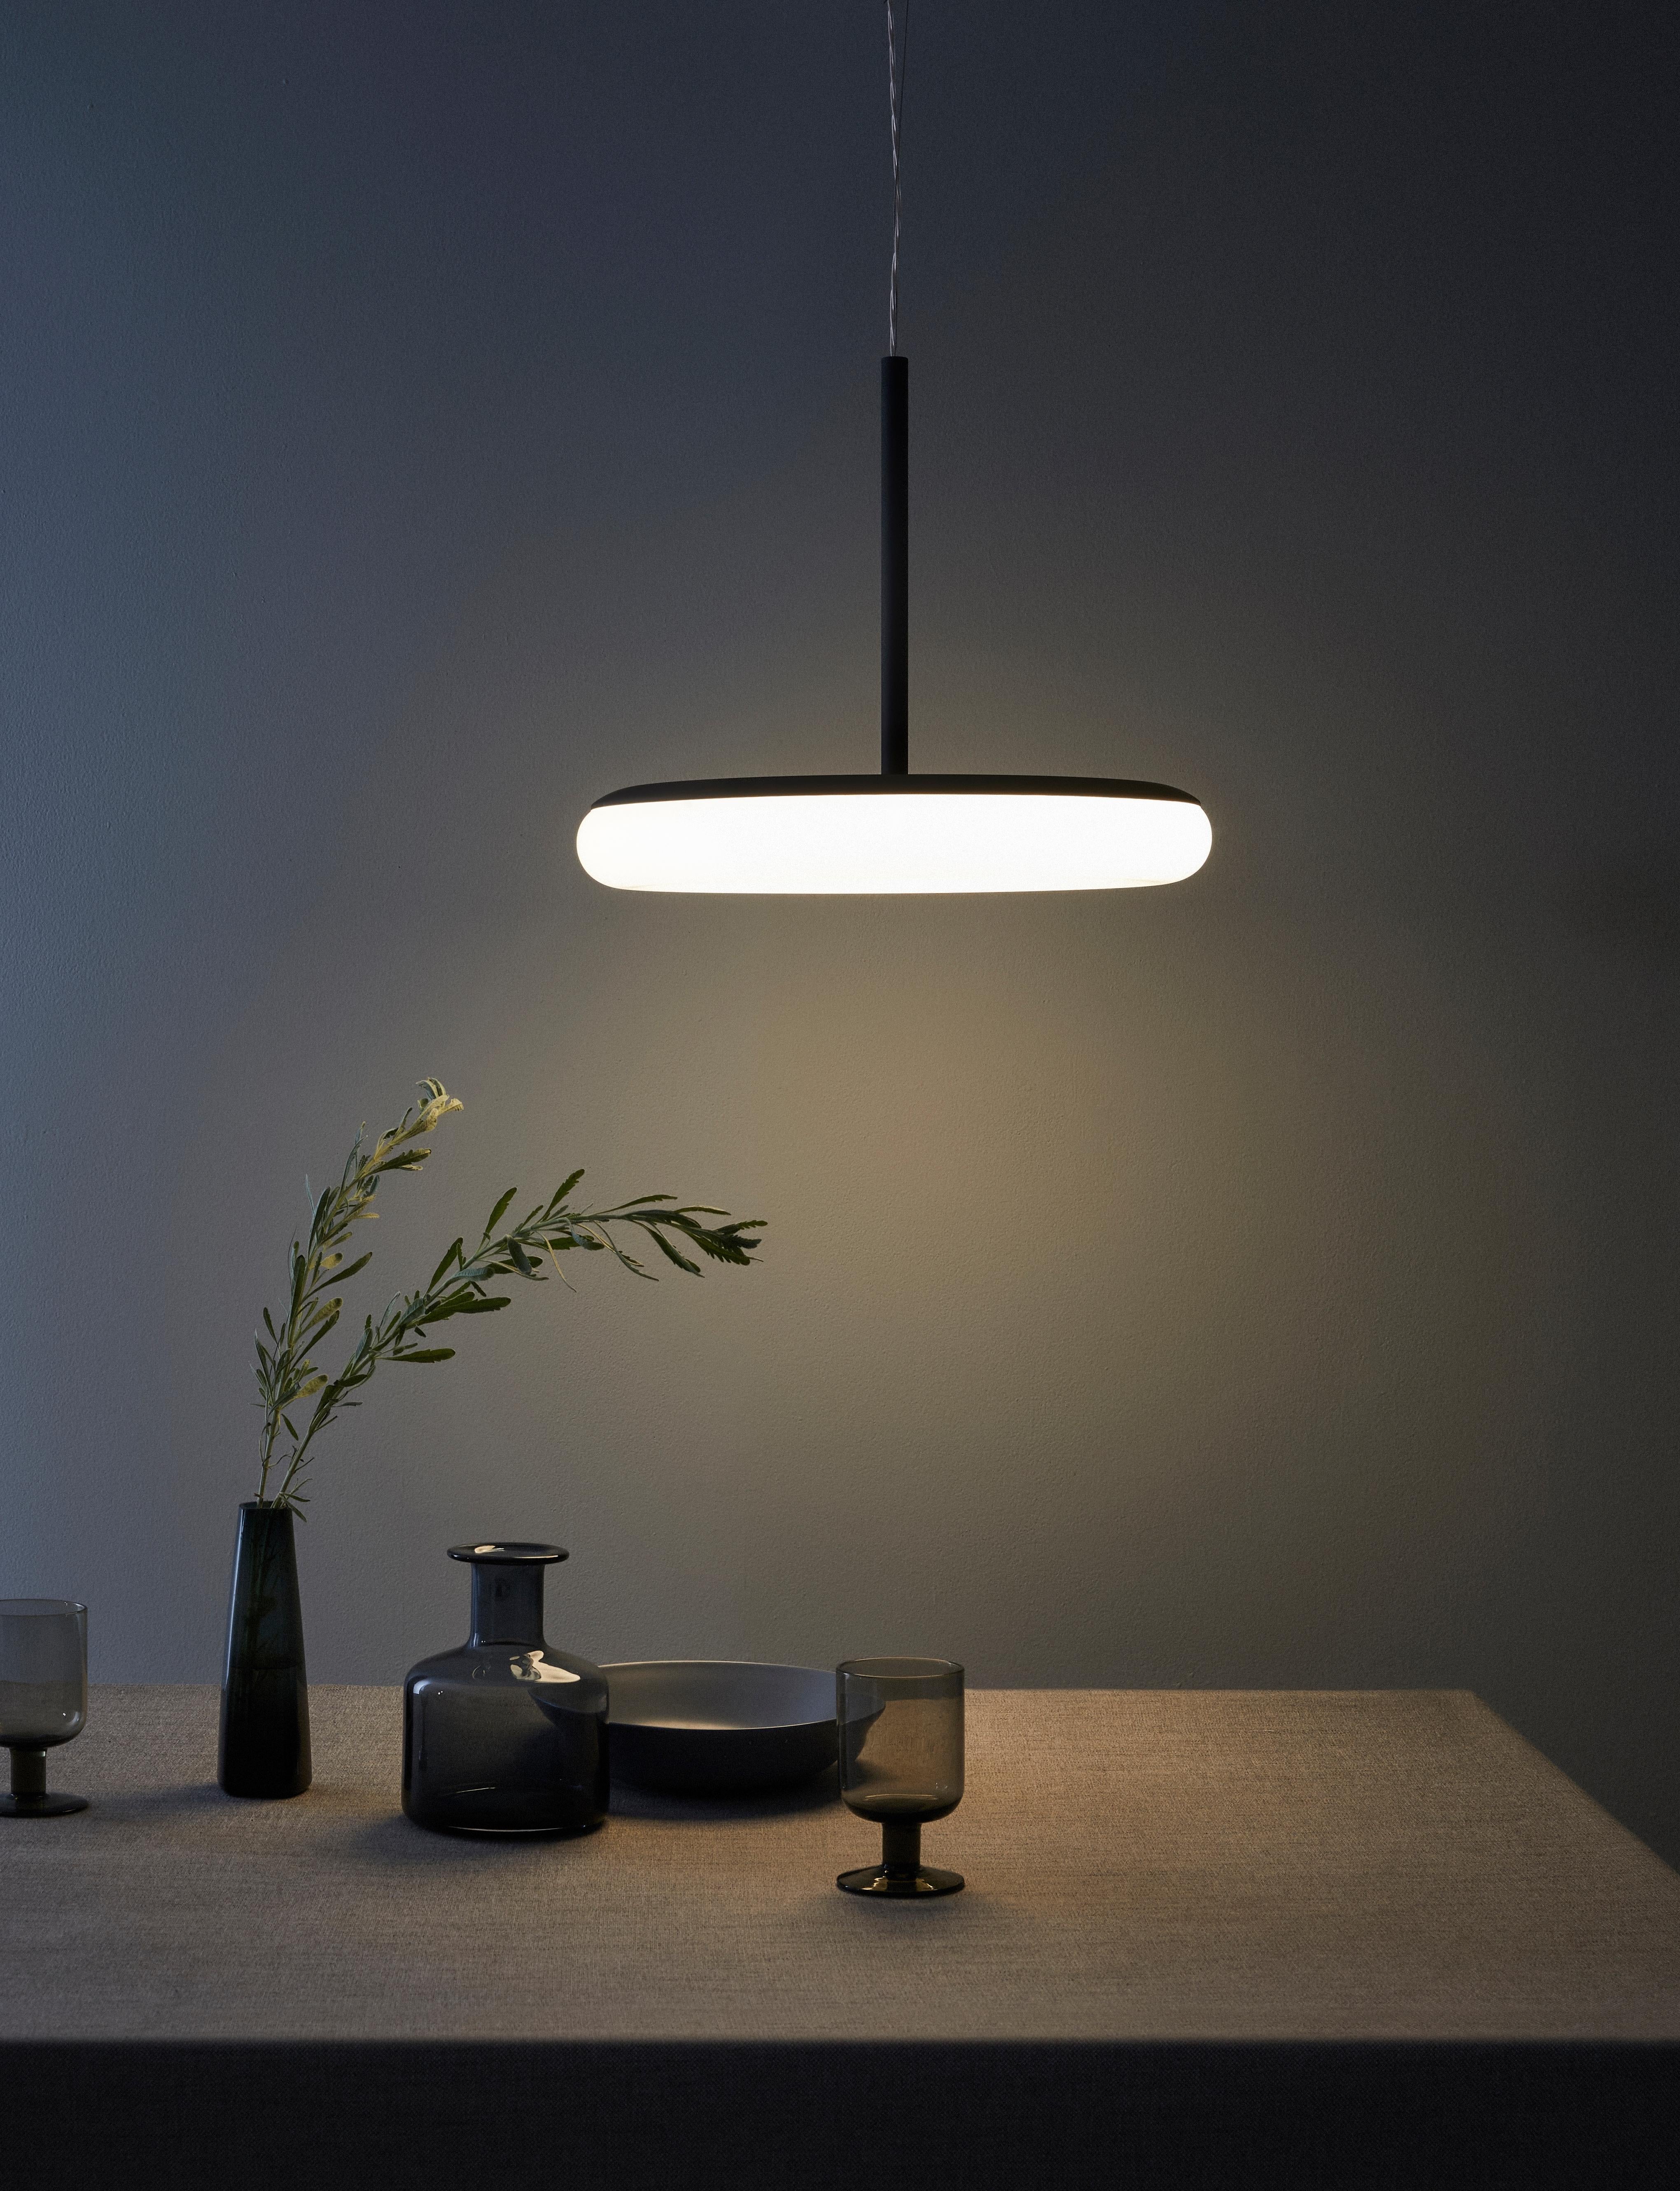 Mozzi Pendant Lamp by AGO Lighting

Opal glass, Steel, Aluminum Integrated LED (SMD), DC
Light source: Integrated LED (SMD), DC
Watt: 13 W
Color Temp. 2700 / 3000 K
Cable Lengths 3m
Ceiling cup Ø 90, H 40 mm

Two sizes available: large (44